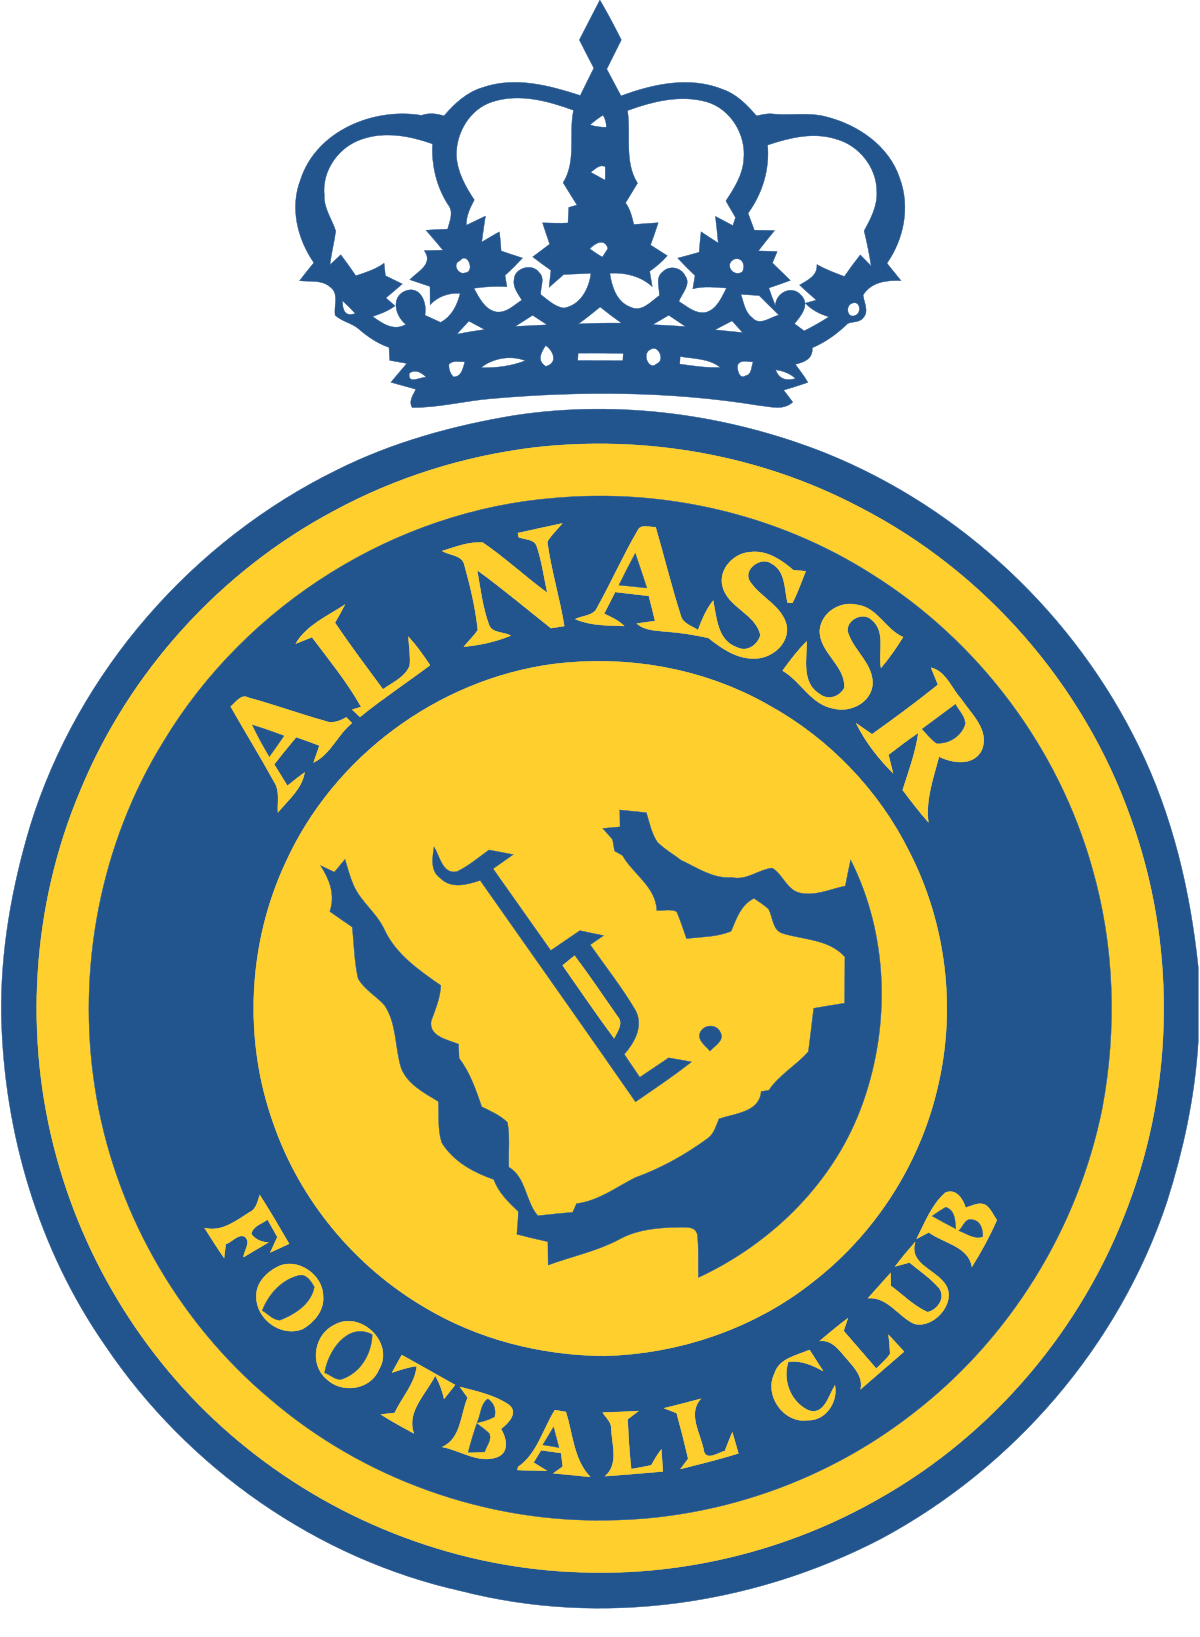 a blue and yellow logo with a crown